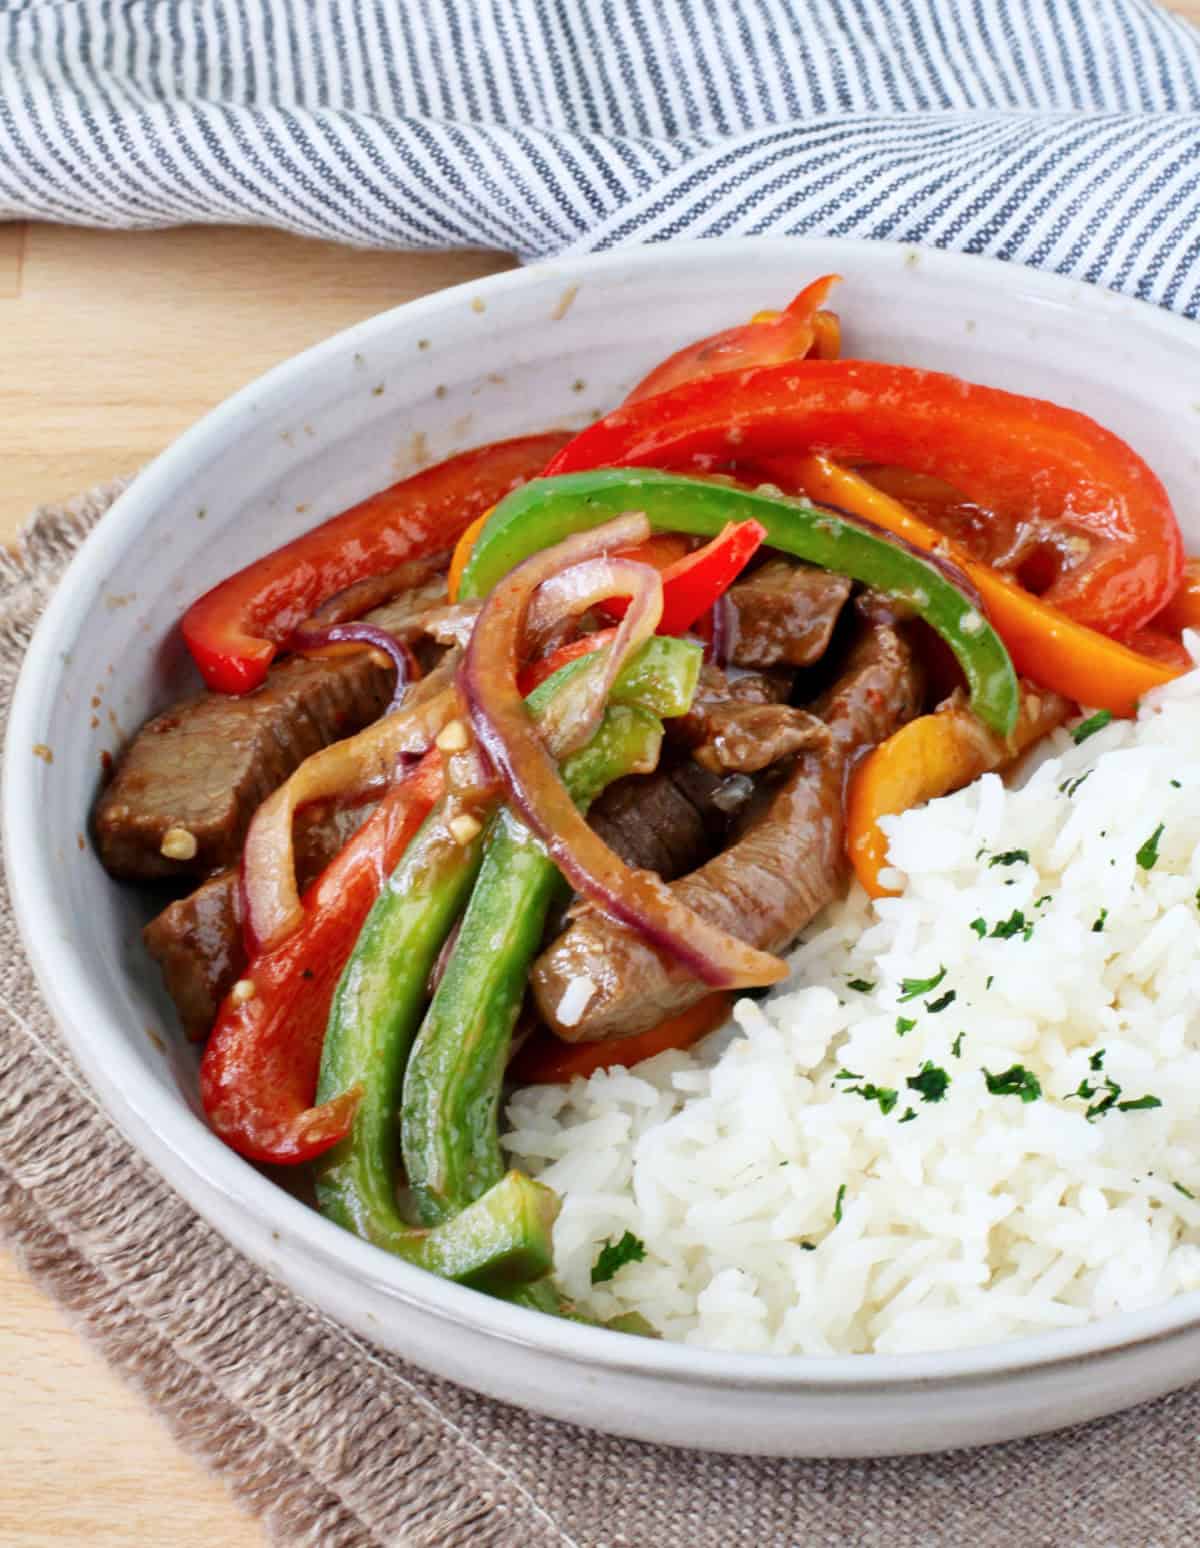 Hot Pepper Beef Stir-Fry with white rice in a bowl.